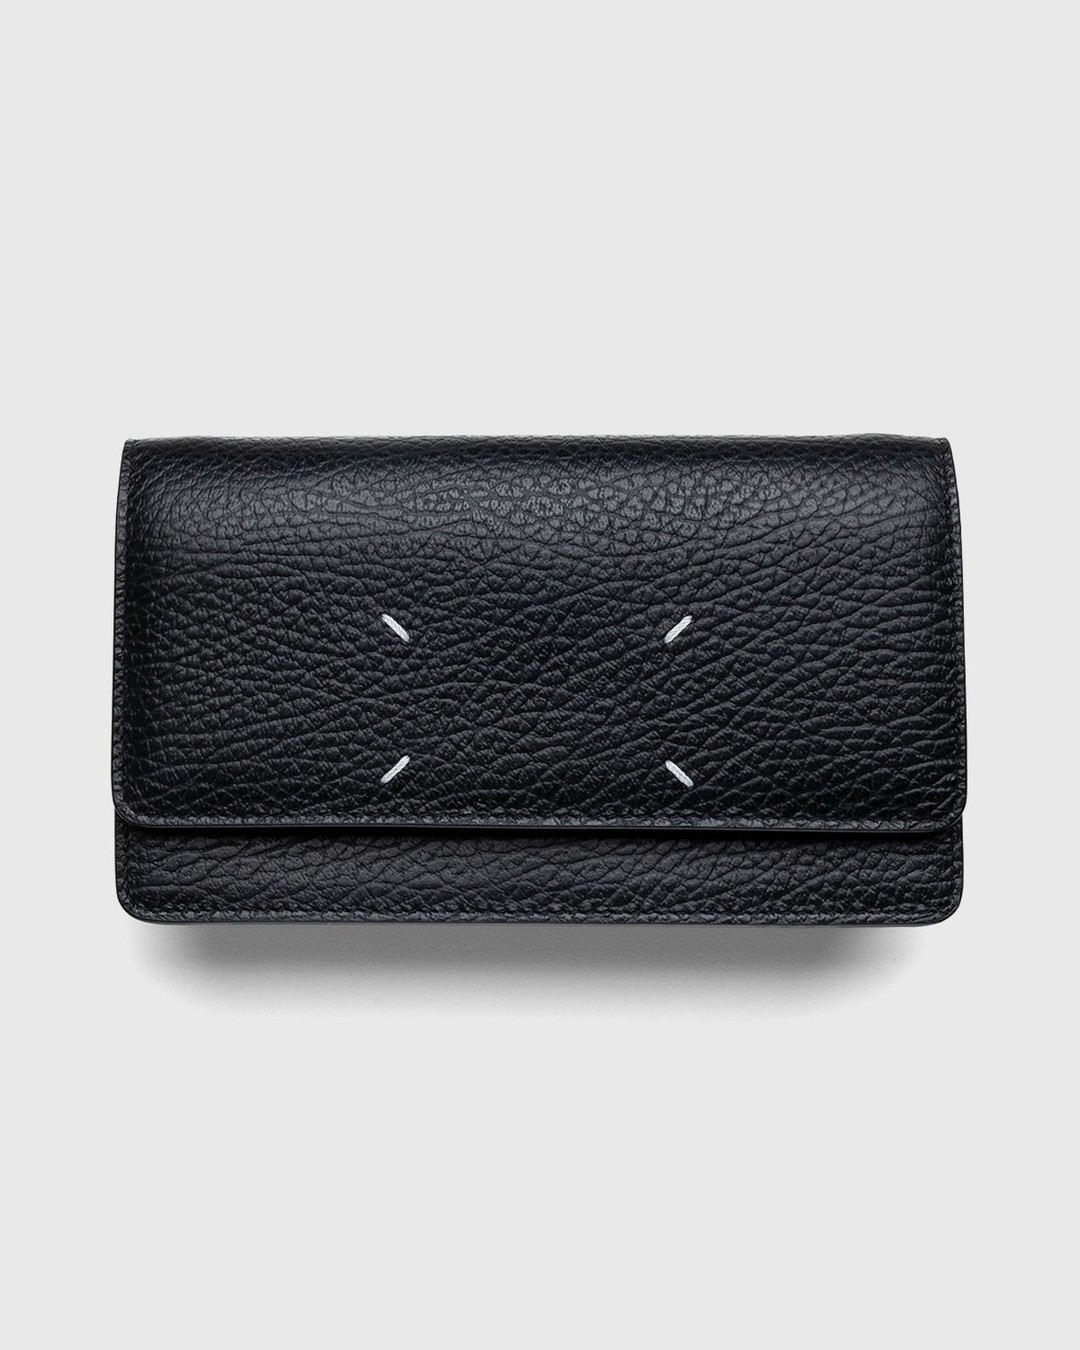 Maison Margiela – Leather Wallet With Chain Black - Wallets - Black - Image 3